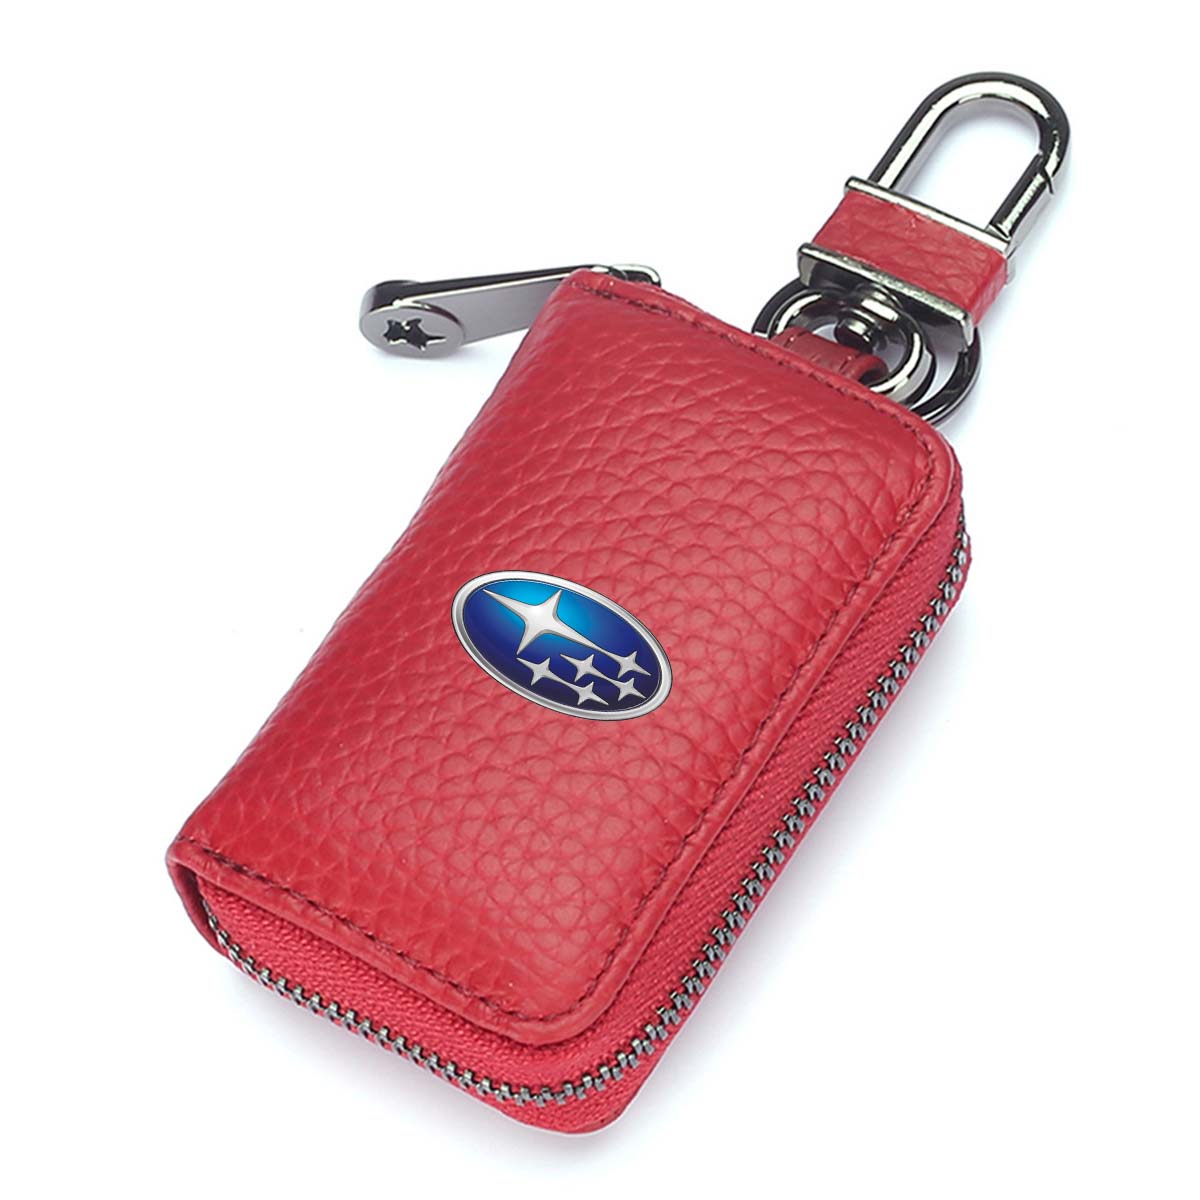 Car Key Cover, Custom For Your Cars, Genuine Leather Car Smart Key Chain Coin Holder Metal Hook and Keyring Wallet Zipper Bag, Car Accessories SU13989